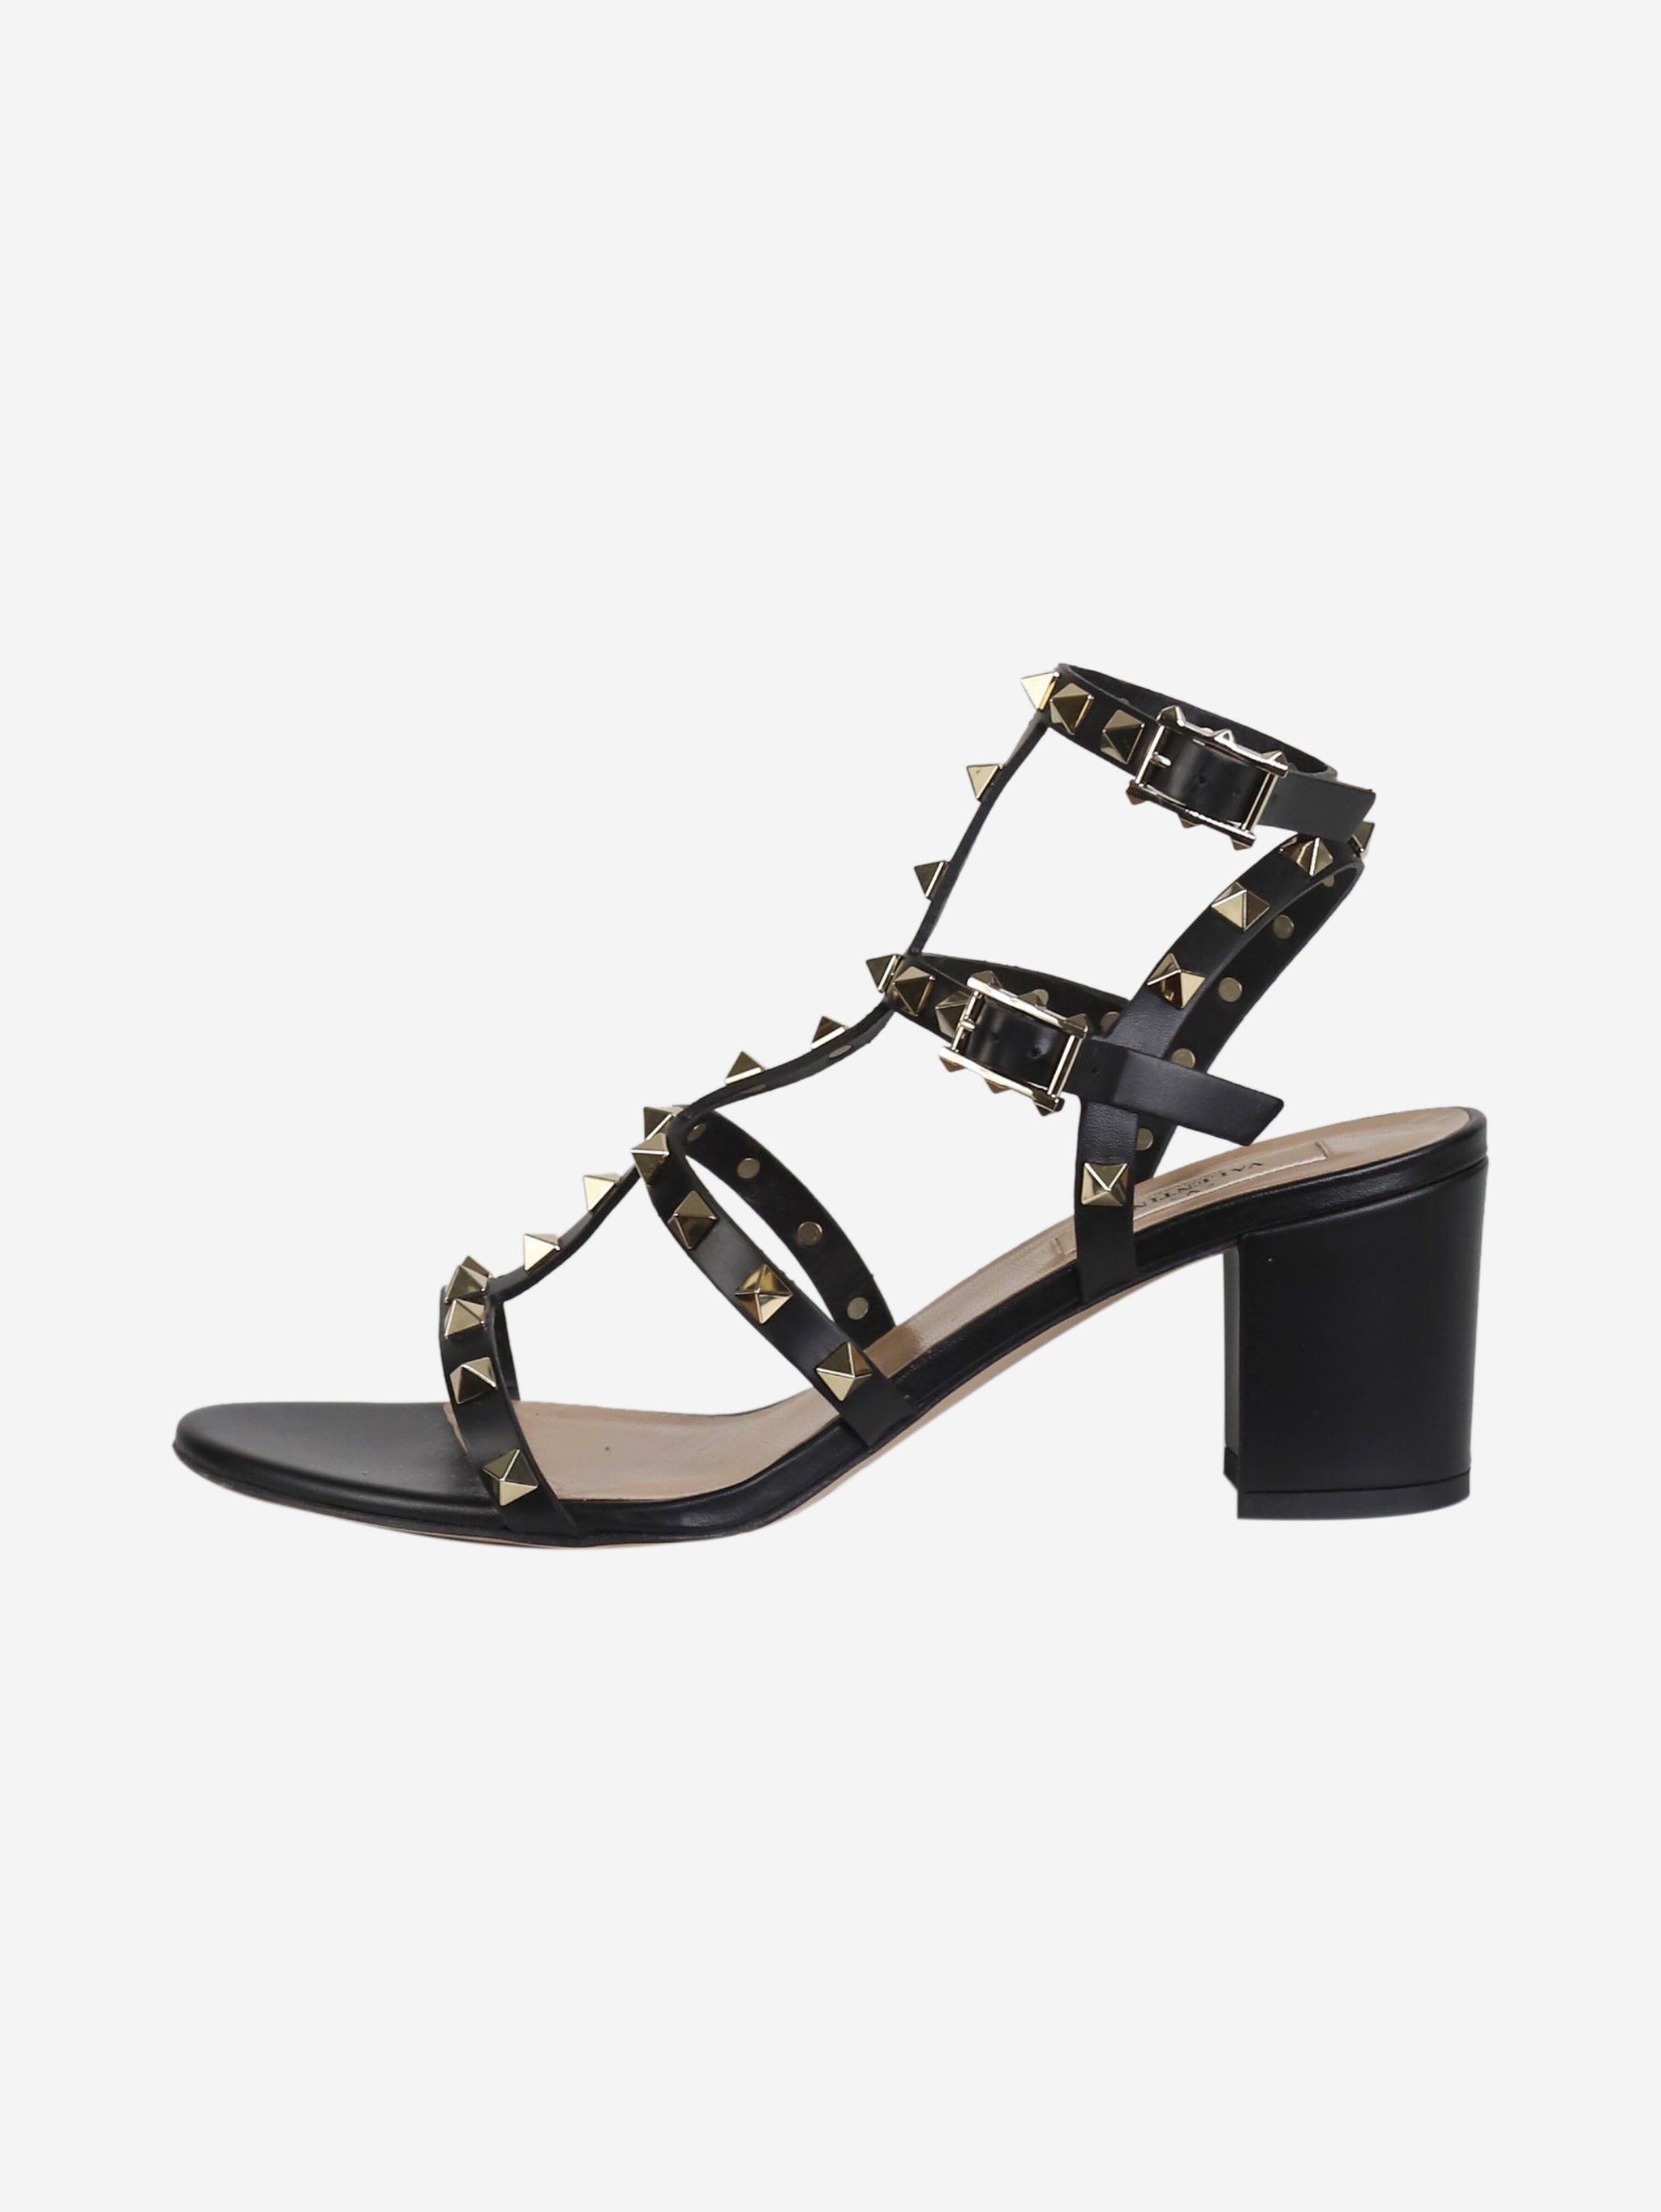 Black pre-owned Valentino studded sandal heels | Sign of the Times